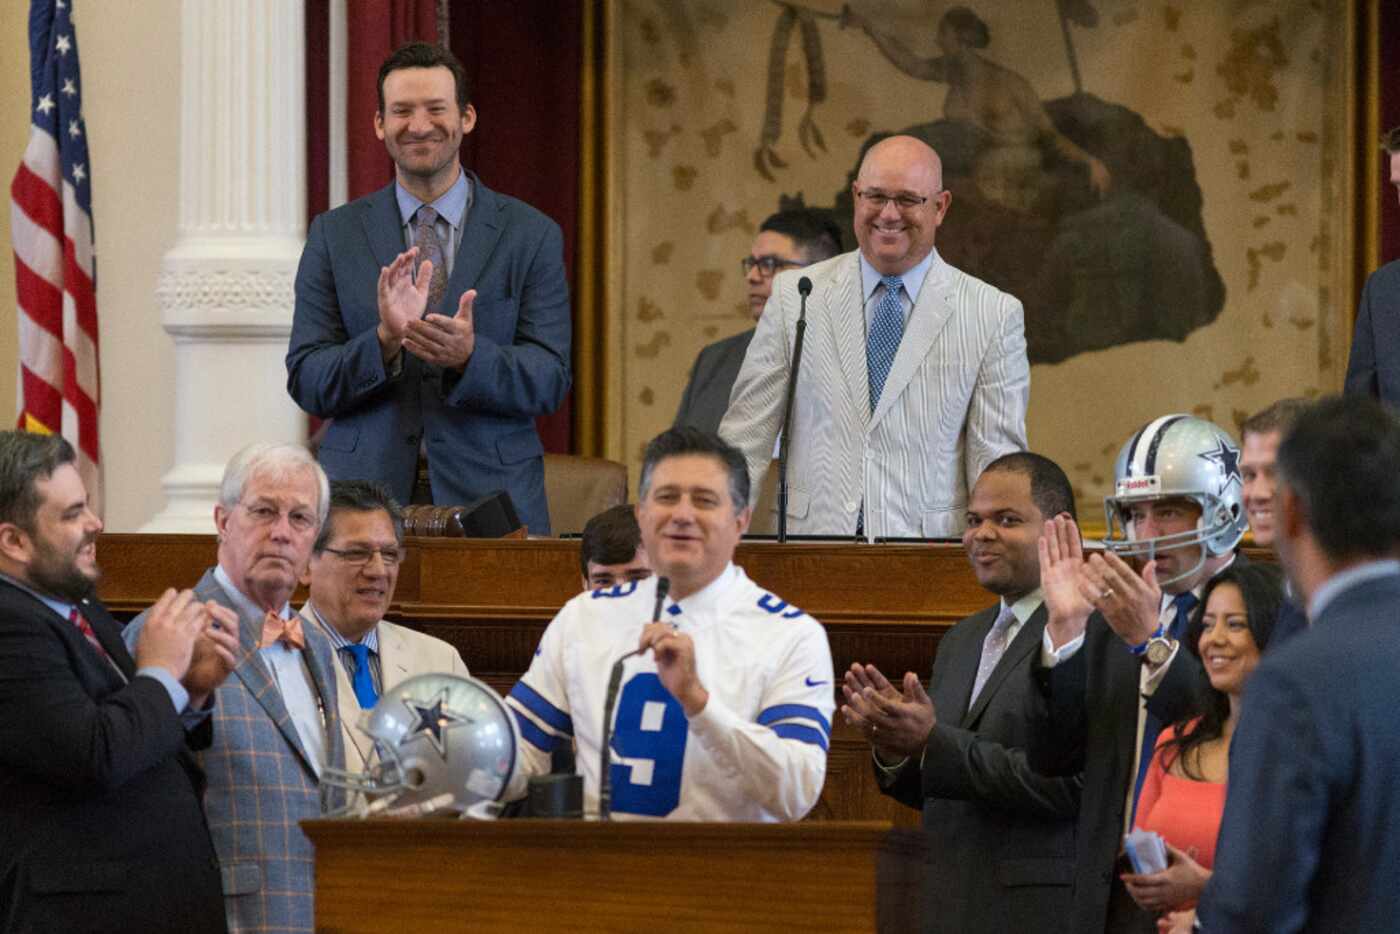 Former Dallas Cowboys quarterback Tony Romo claps as he is recognized by the House at the...